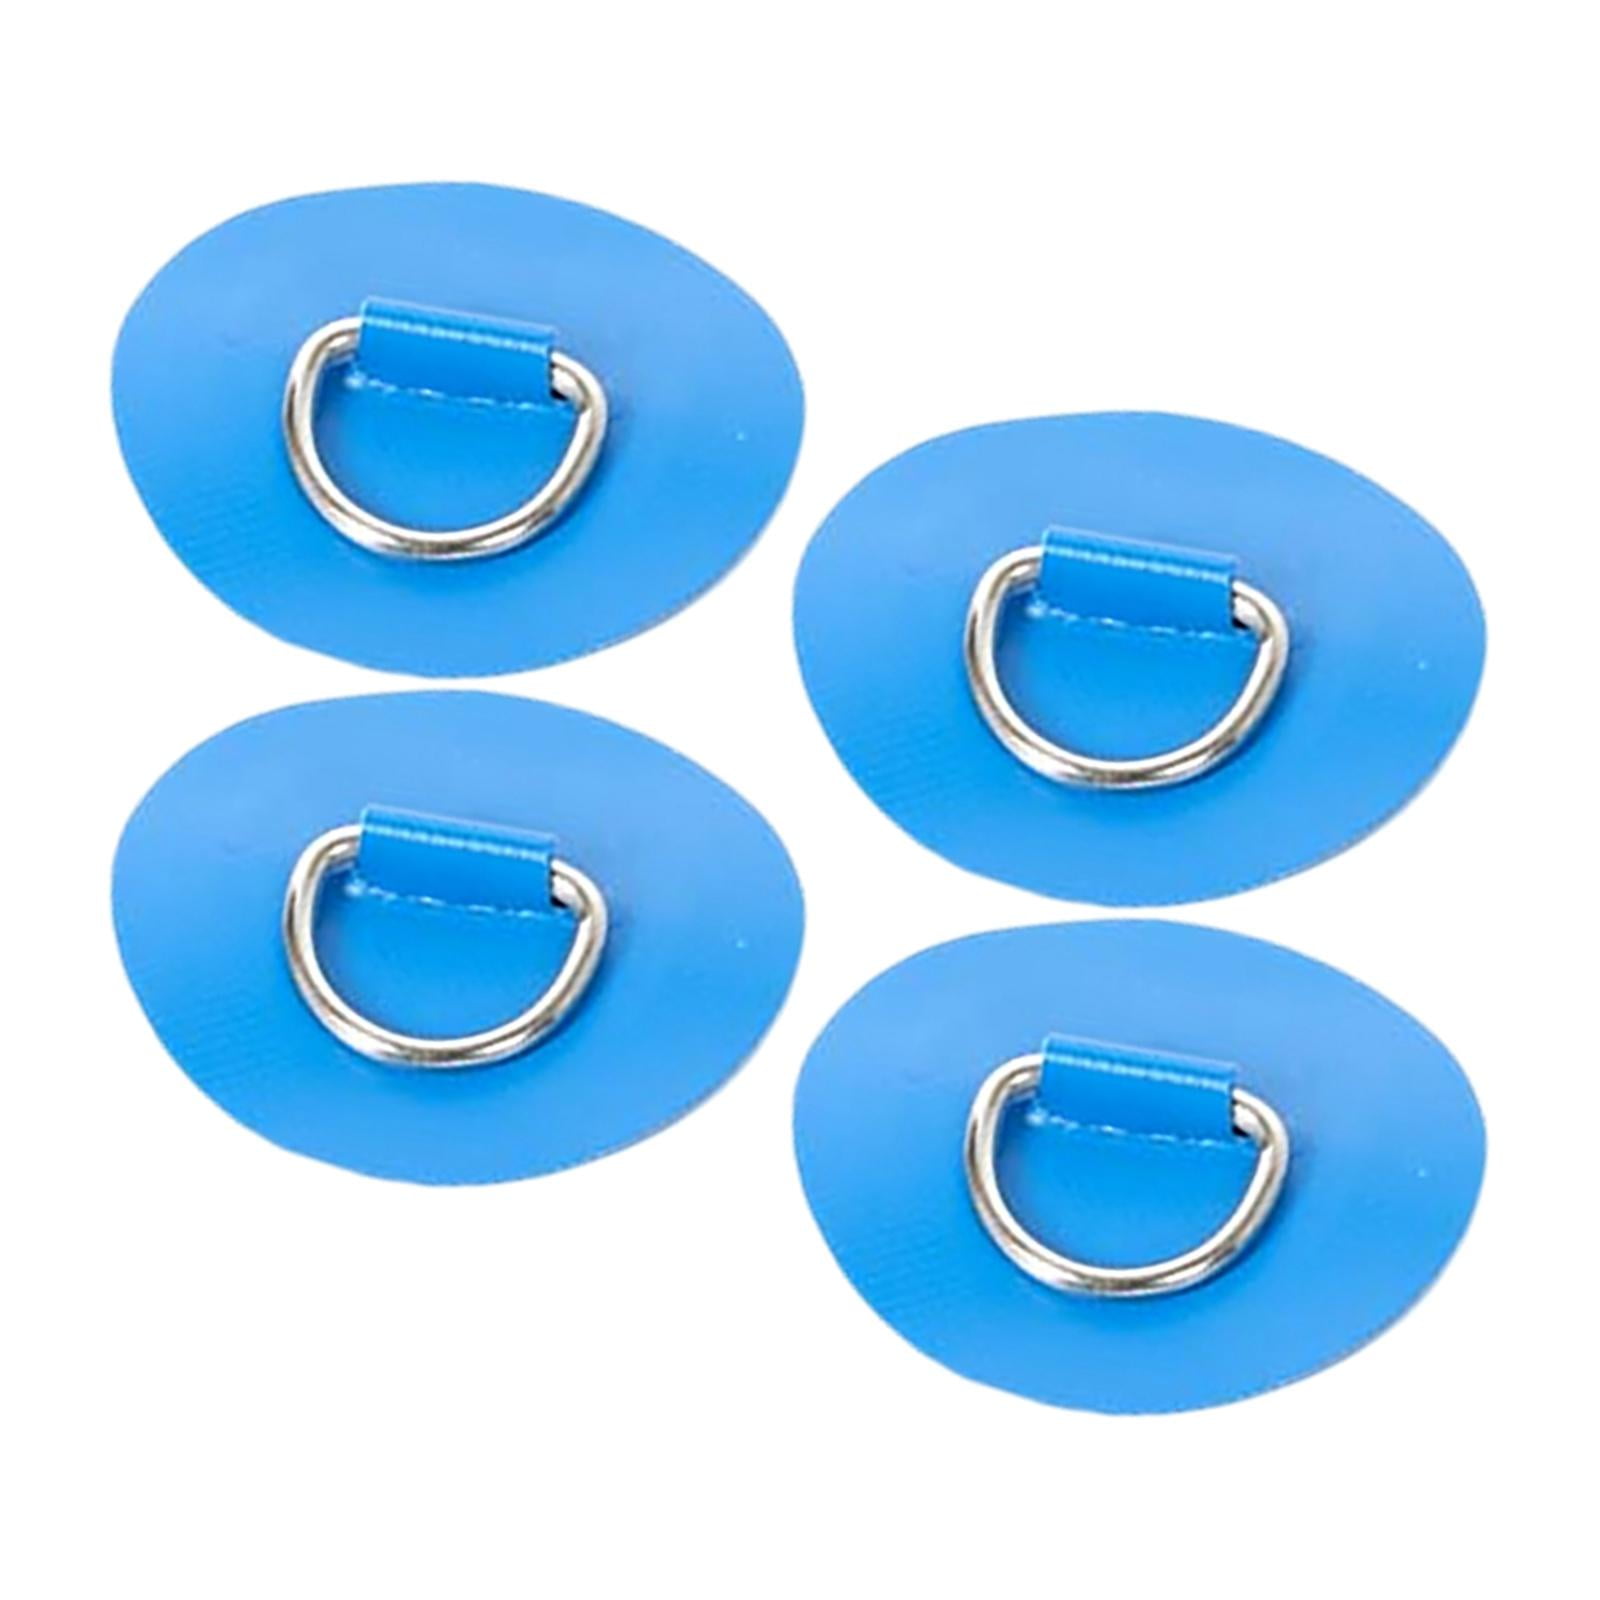 Stainless Steel D Ring Pad Patch Parts for PVC Inflatable Boat Raft Canoe Kayak 